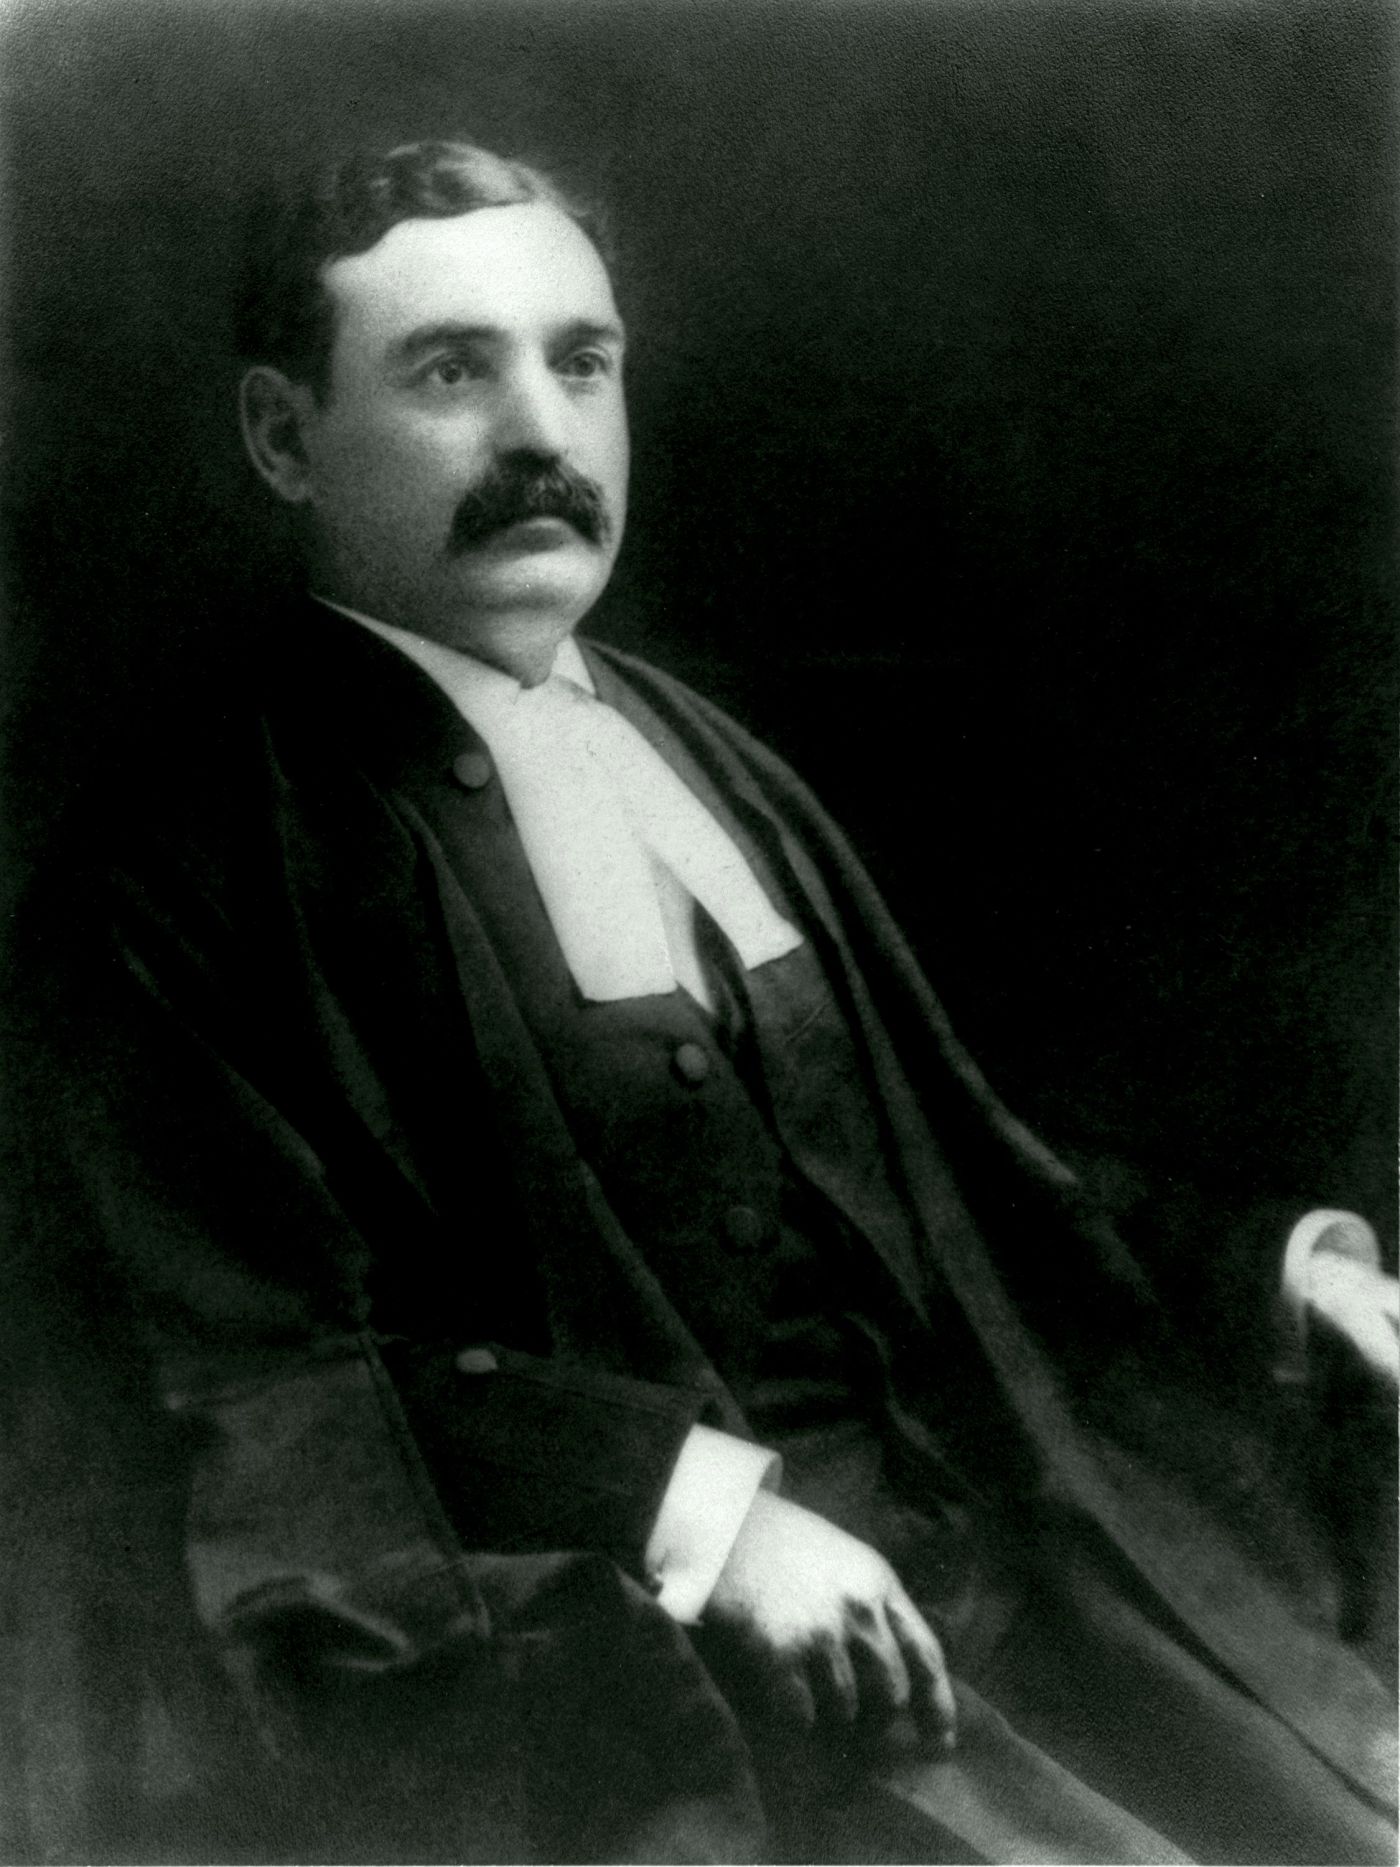 Black and white studio photograph of a middle-aged man sporting a mustache. He wears the long, loose gown and white collar of a lawyer.